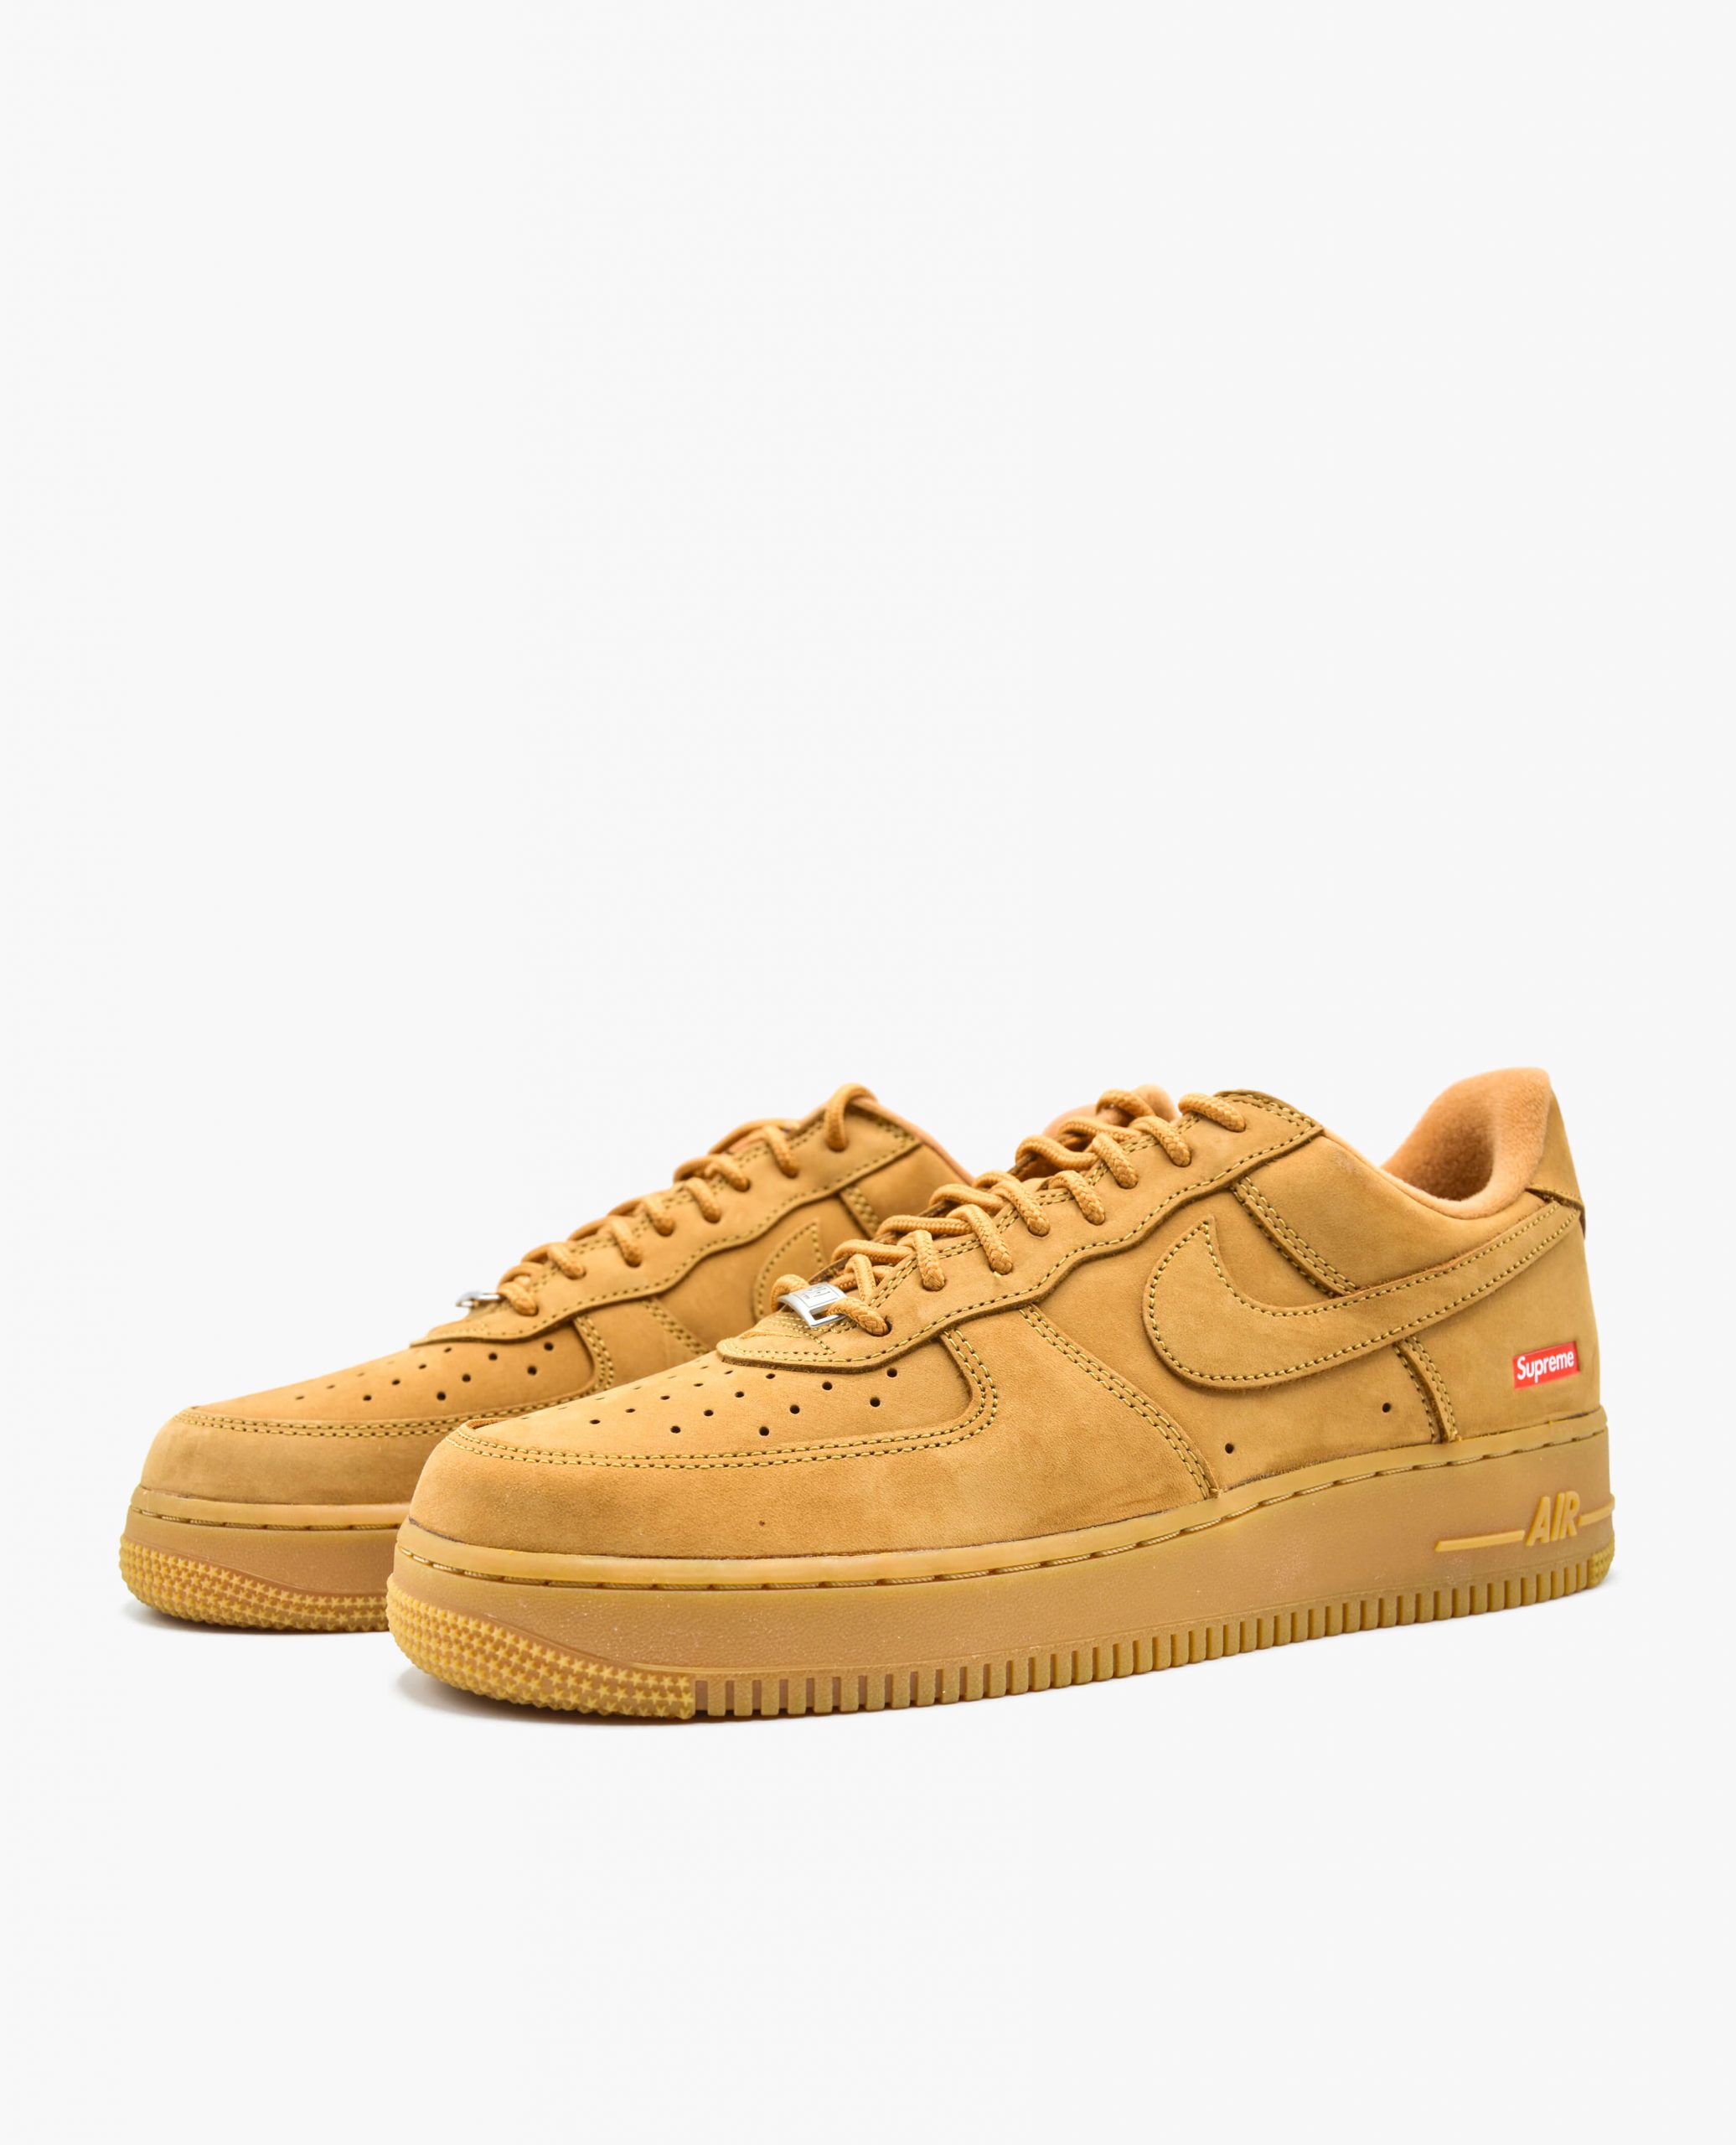 Air Force 1 Low SP Wheat – Kick Louder